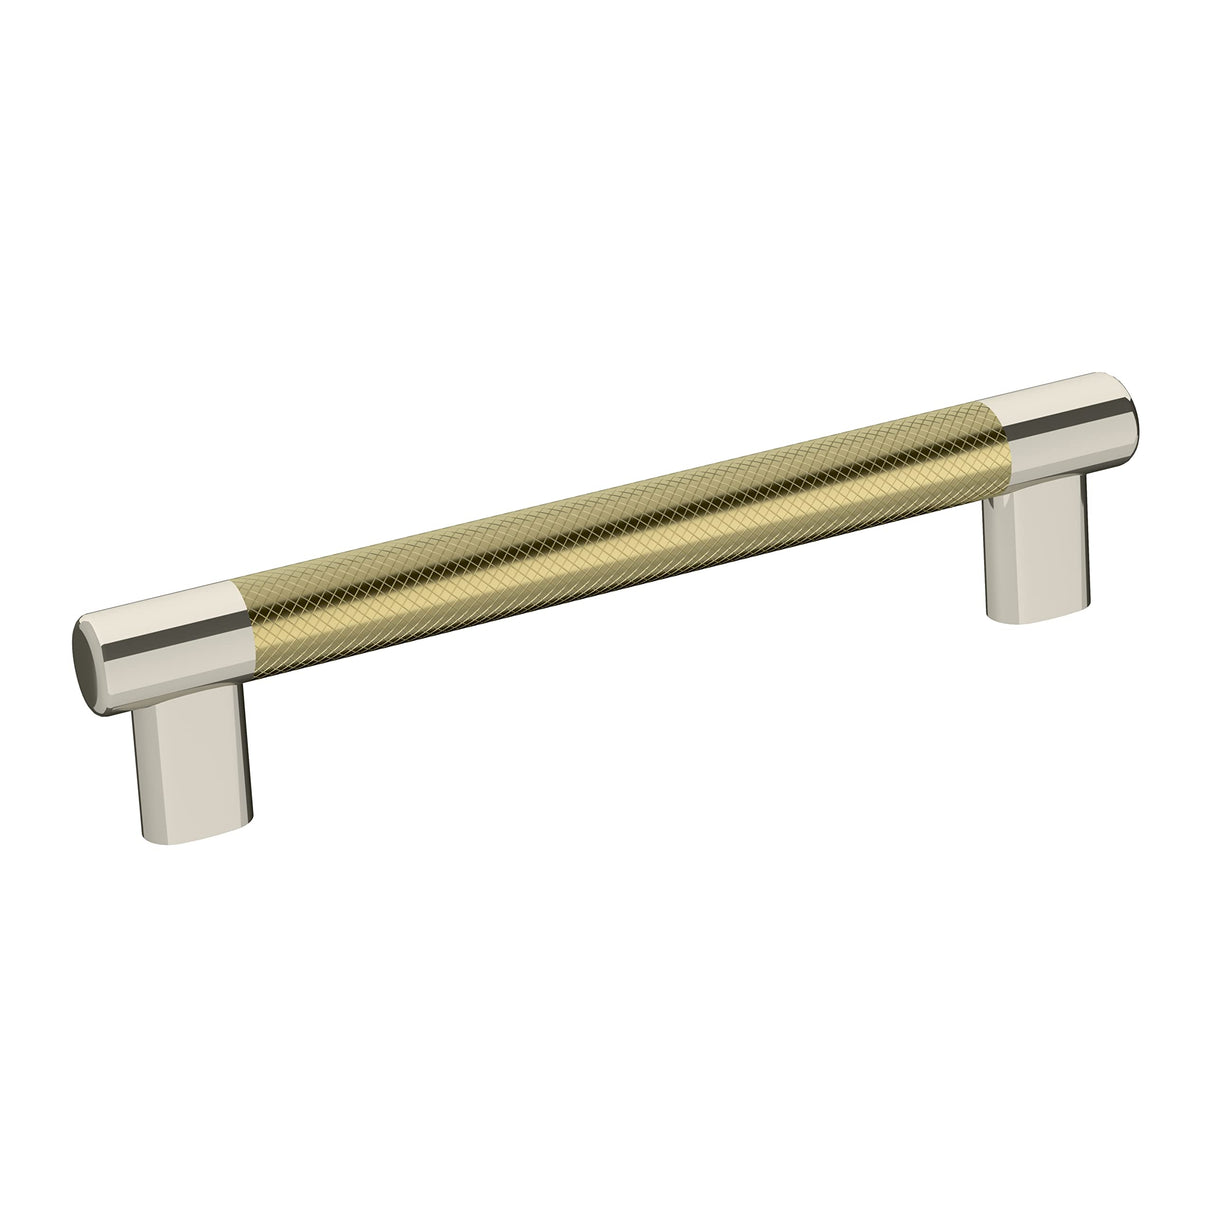 Amerock Cabinet Pull Polished Nickel/Golden Champagne 6-5/16 inch (160 mm) Center-to-Center Esquire 1 Pack Drawer Pull Drawer Handle Cabinet Hardware